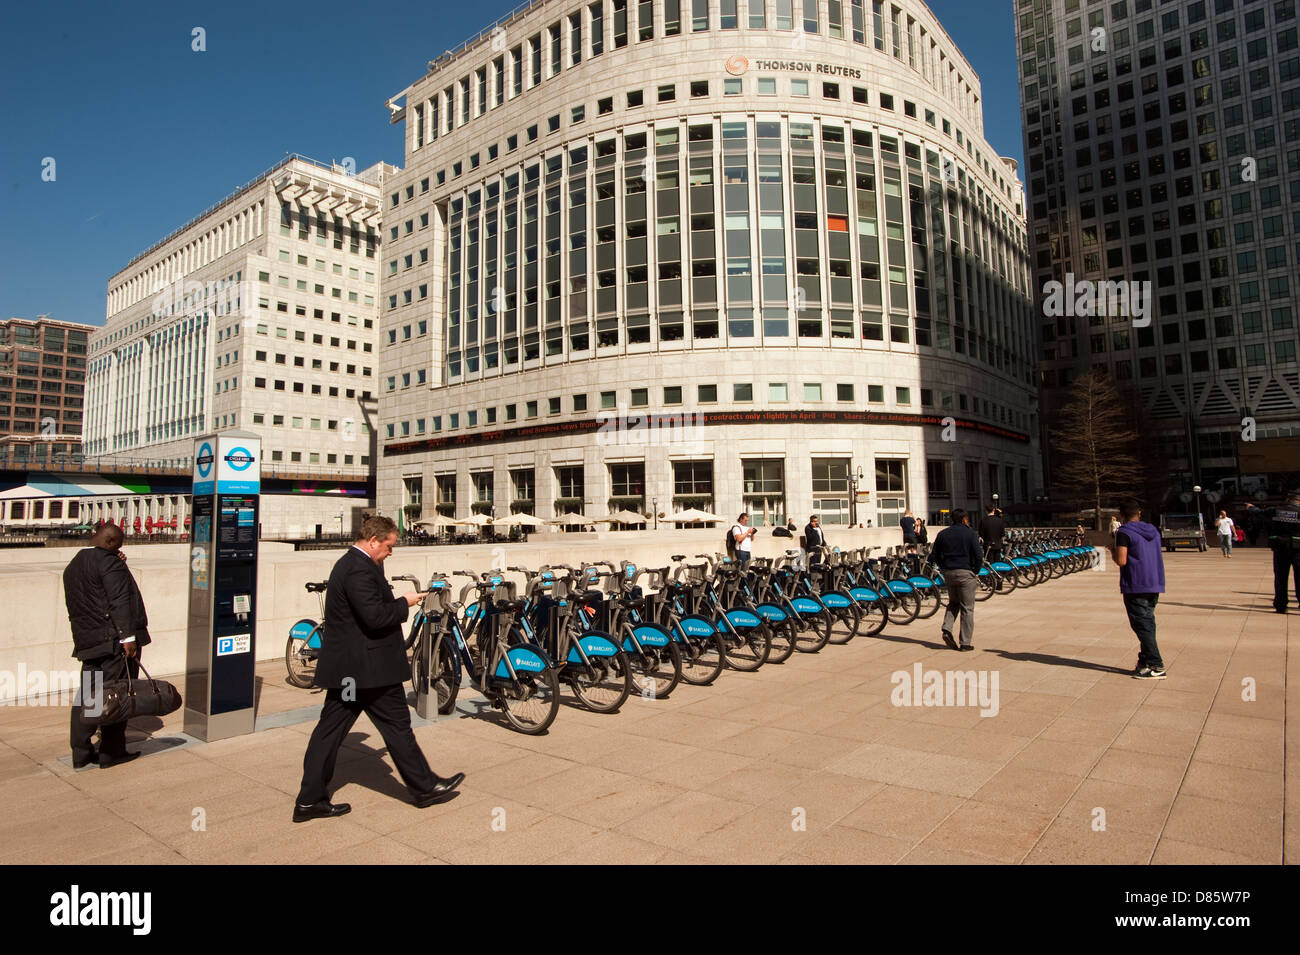 Canary Wharf Business District Thomson Reuters London England Stock Photo